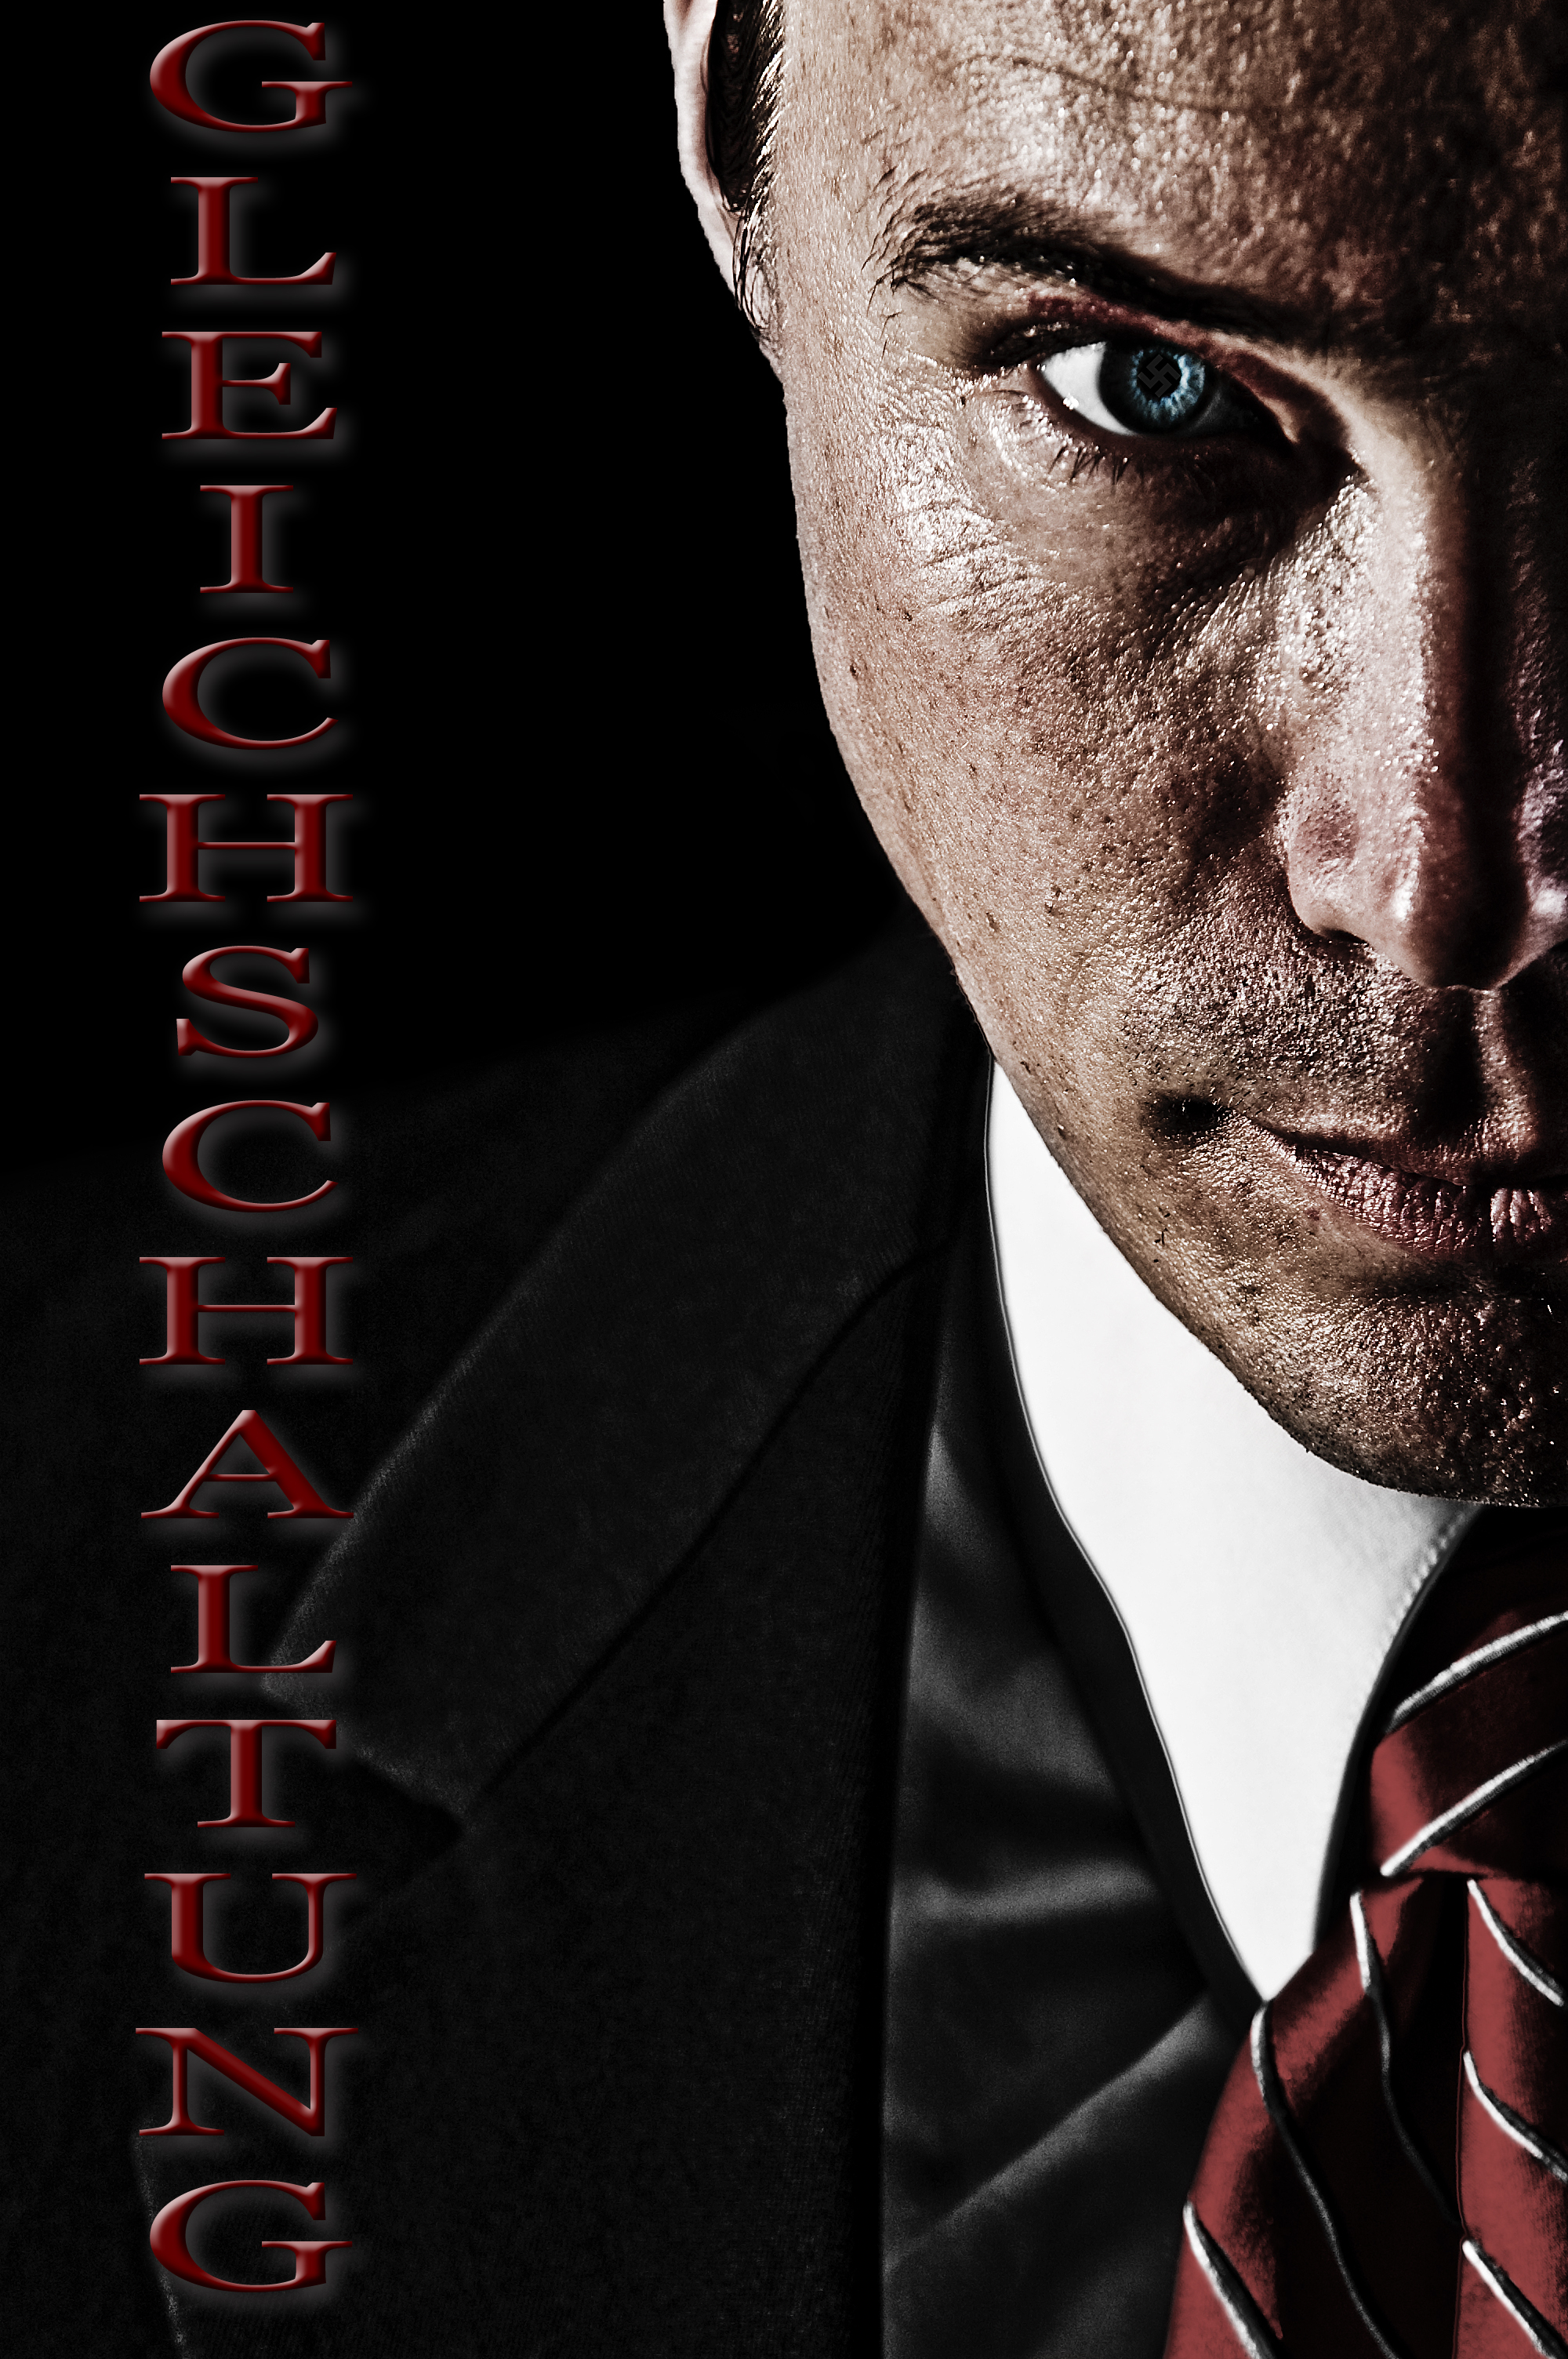 Movie poster for feature length film Gleichschaltung slated for production 2011